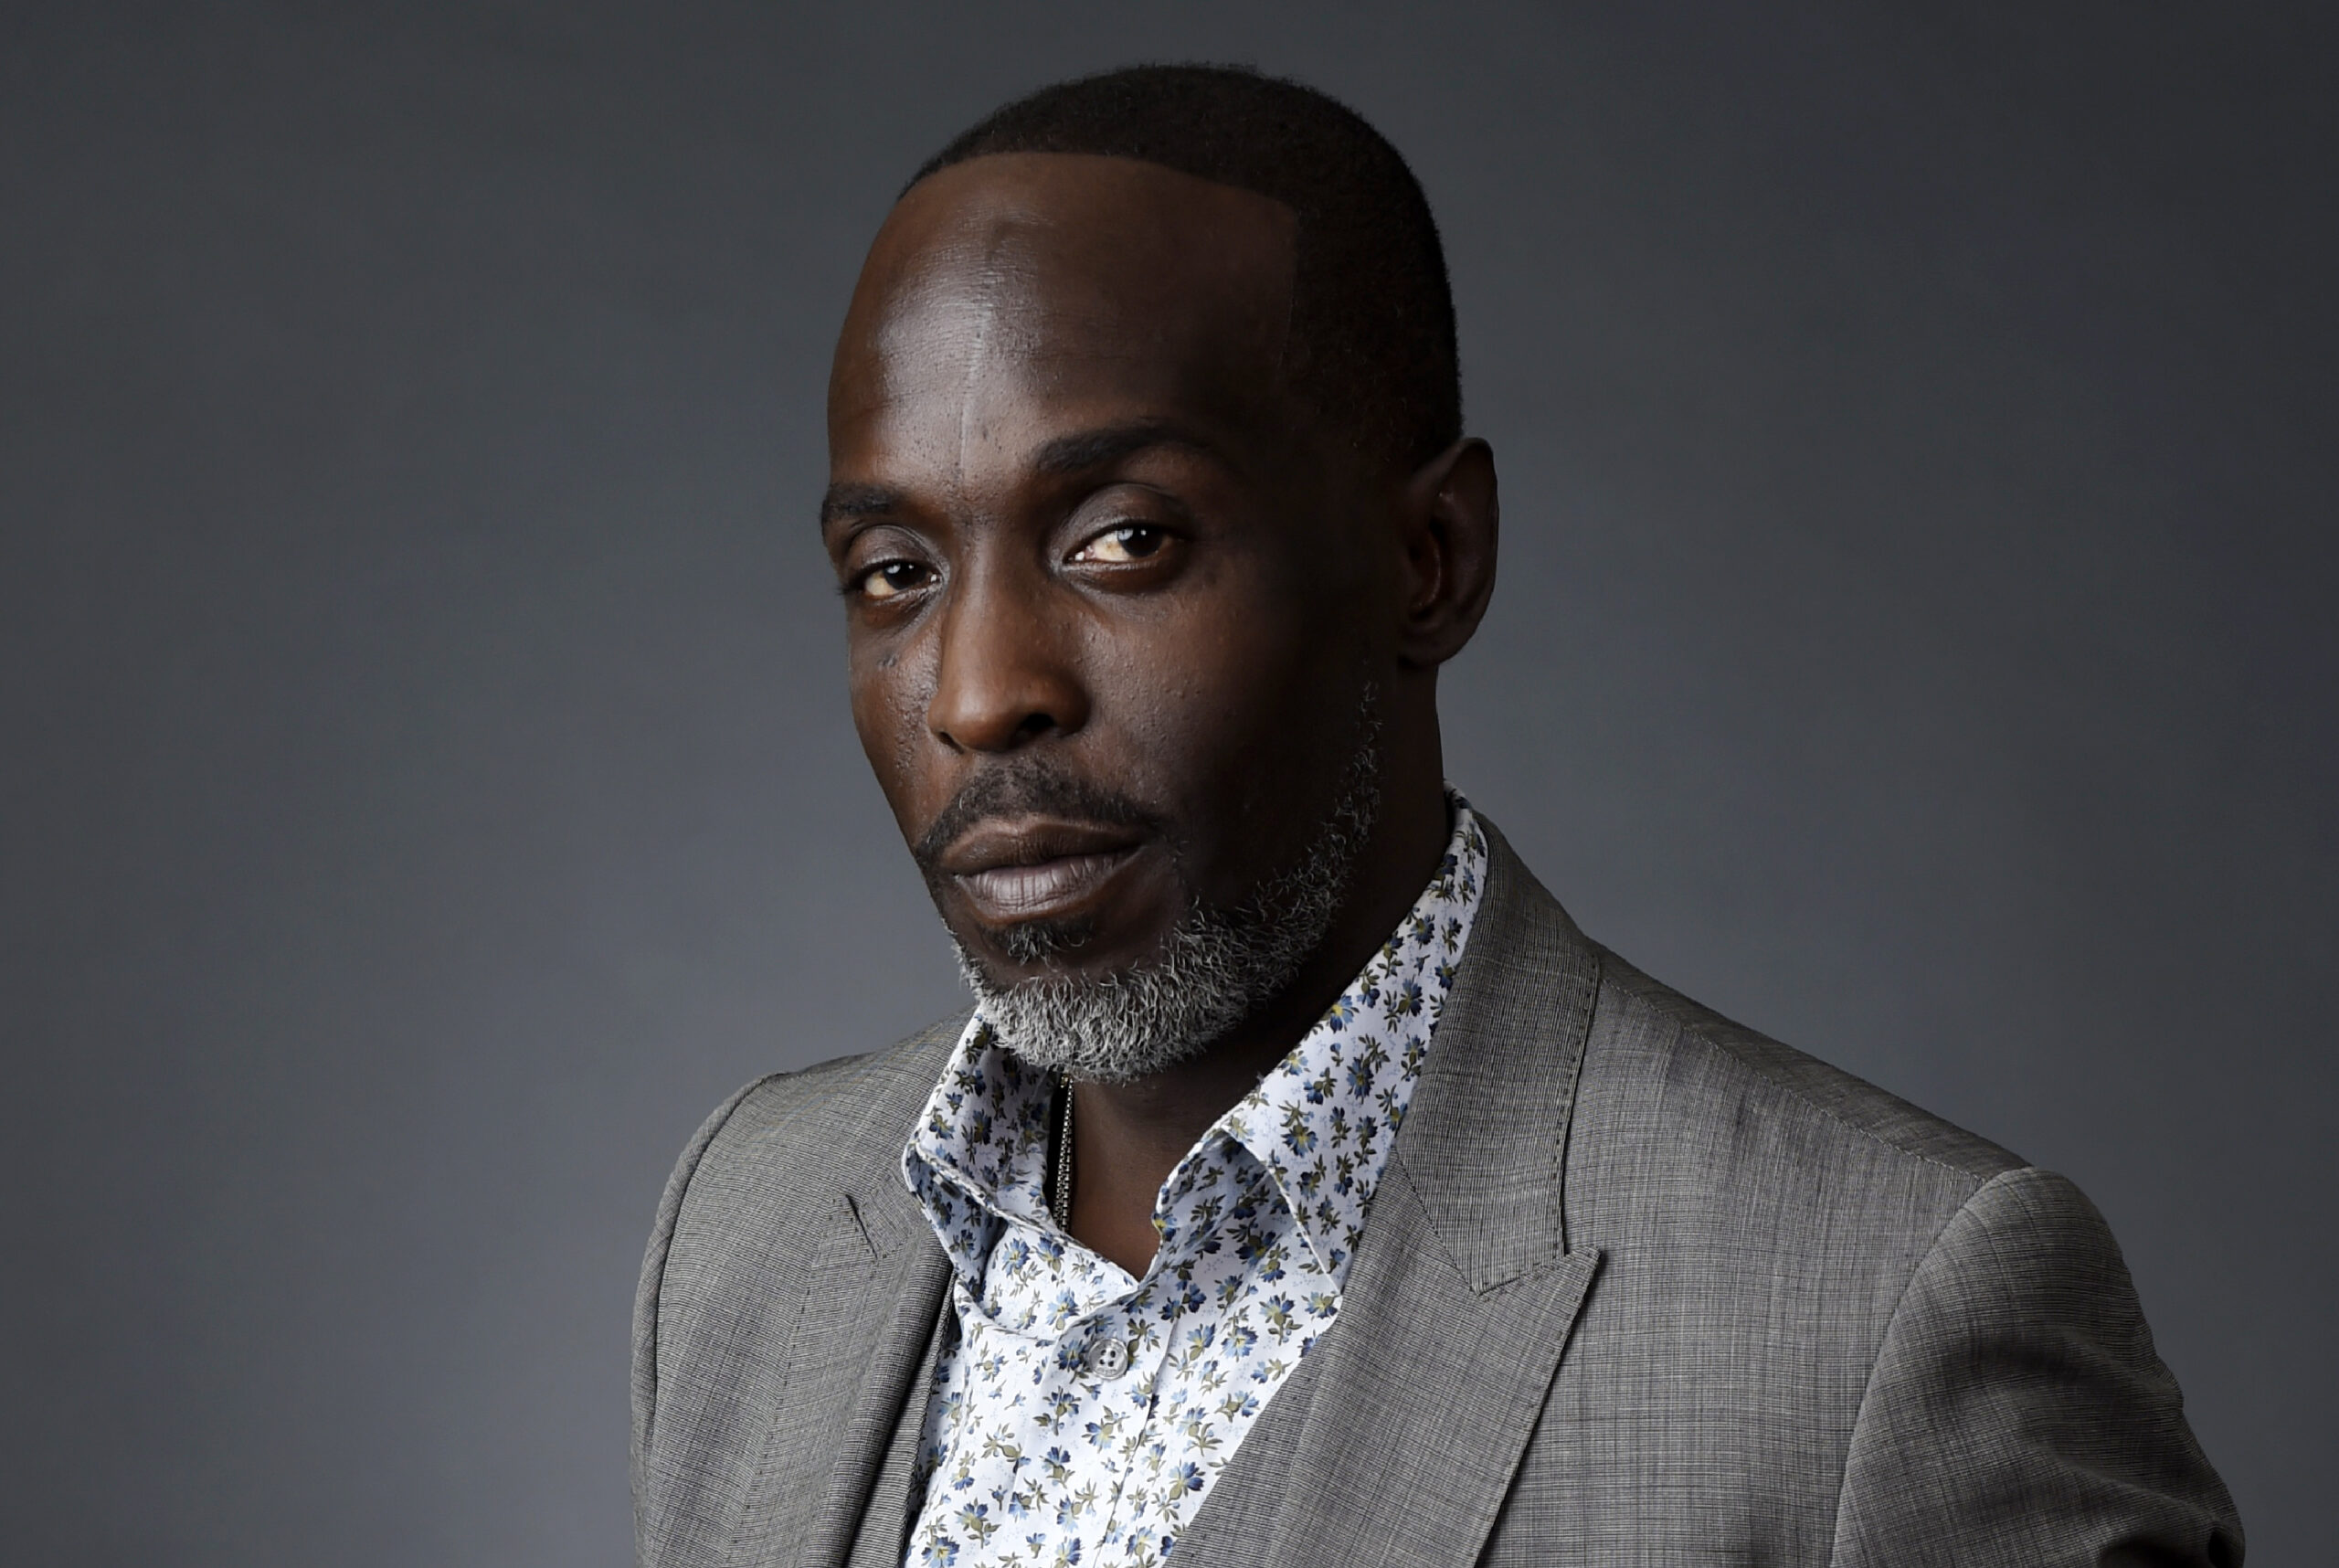 FILE - Actor Michael K. Williams poses for a portrait at the Beverly Hilton during the 2016 Television Critics Association Summer Press Tour, Saturday, July 30, 2016, in Beverly Hills, Calif. Williams, 54, died of acute drug intoxication, New York City’s medical examiner said Friday, Sept. 24, 2021. Williams, known for playing Omar Little on “The Wire,” had fentanyl, parafluorofentanyl, heroin and cocaine in his system when he died Sept. 6 in Brooklyn. (AP Photo/Chris Pizzello, File)